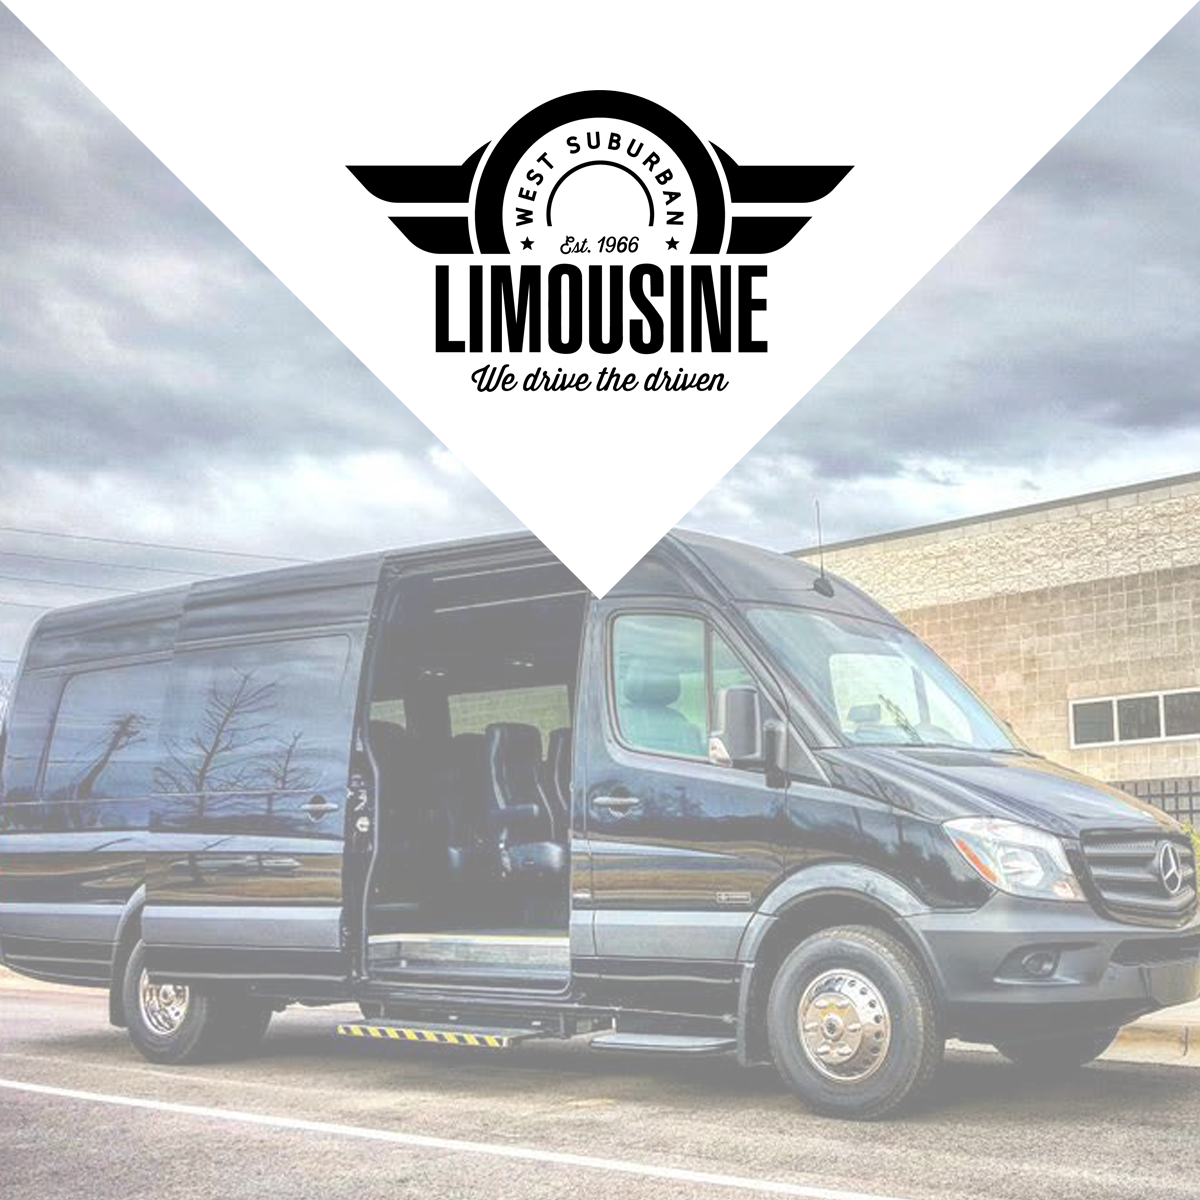 Chicago Limo Bus 2019 New Years Promotion